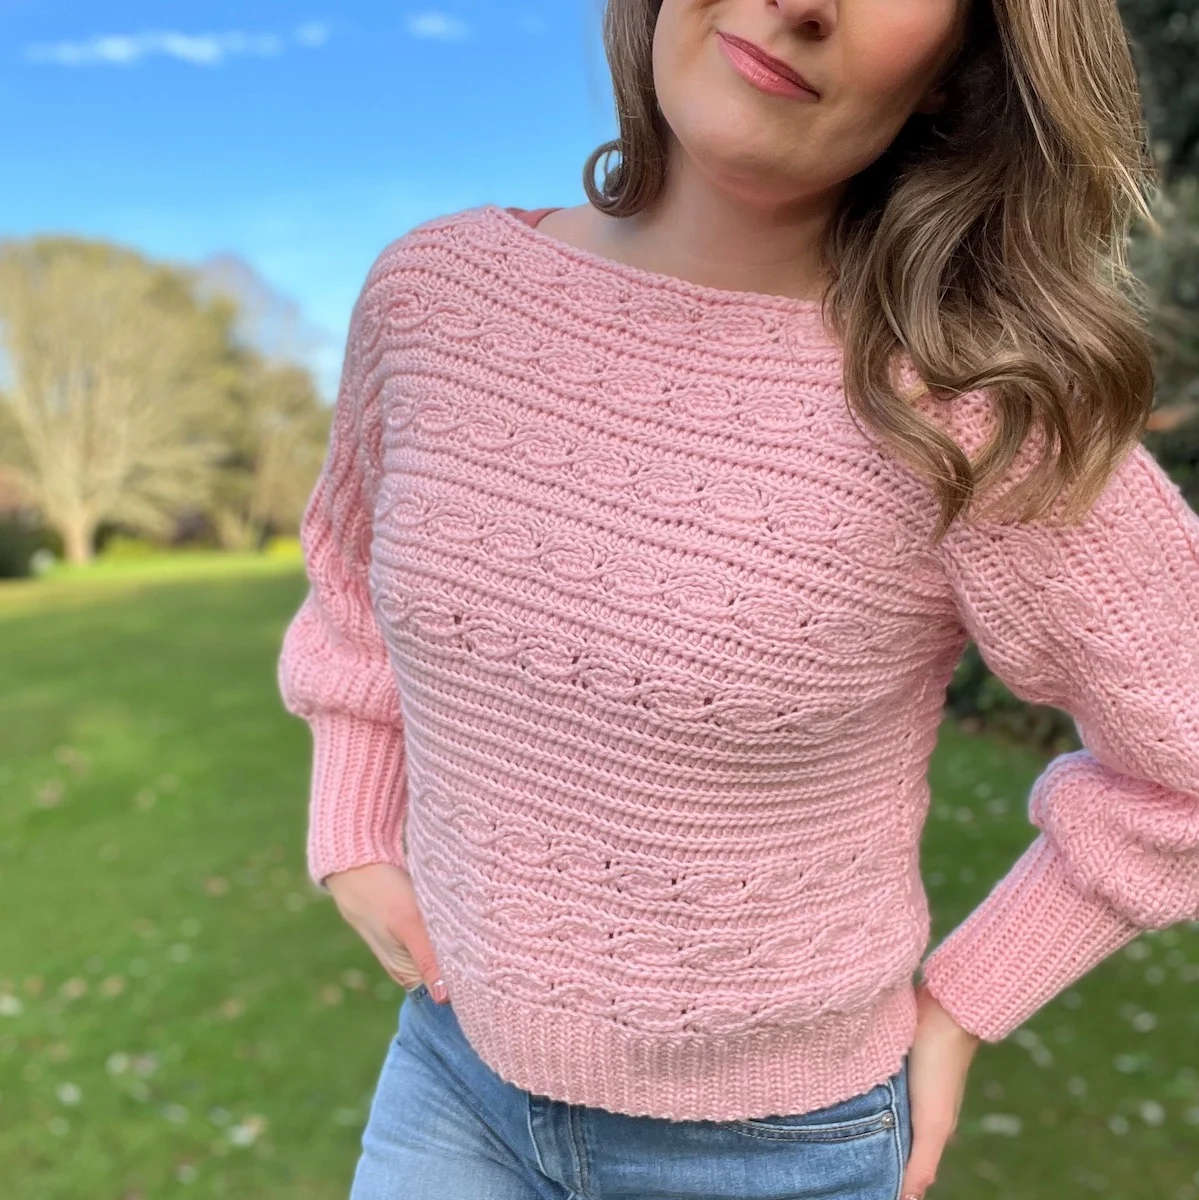 Woman wearing pink crop crochet sweater that has knit look crochet cables in short rows.